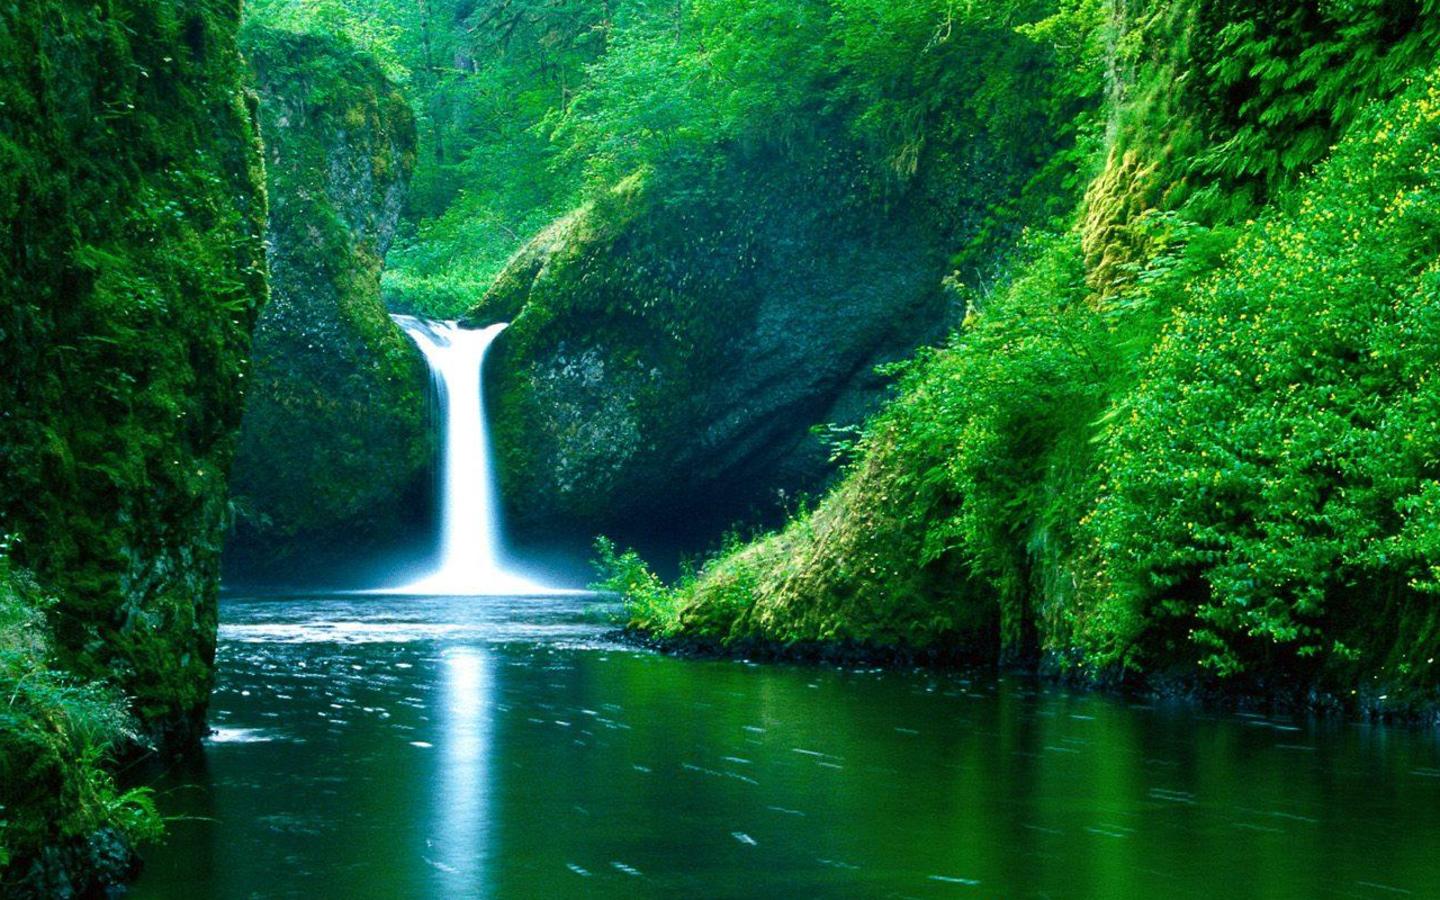 Free Download Hq Punch Bowl Falls 1600 X 10 Wallpaper Hq Wallpapers 1440x900 For Your Desktop Mobile Tablet Explore 50 Free 1600 X 10 Wallpaper Free Springtime Wallpaper 1600 X 900 1600 X 10 Hd Wallpaper Wallpapers 1600 X 900